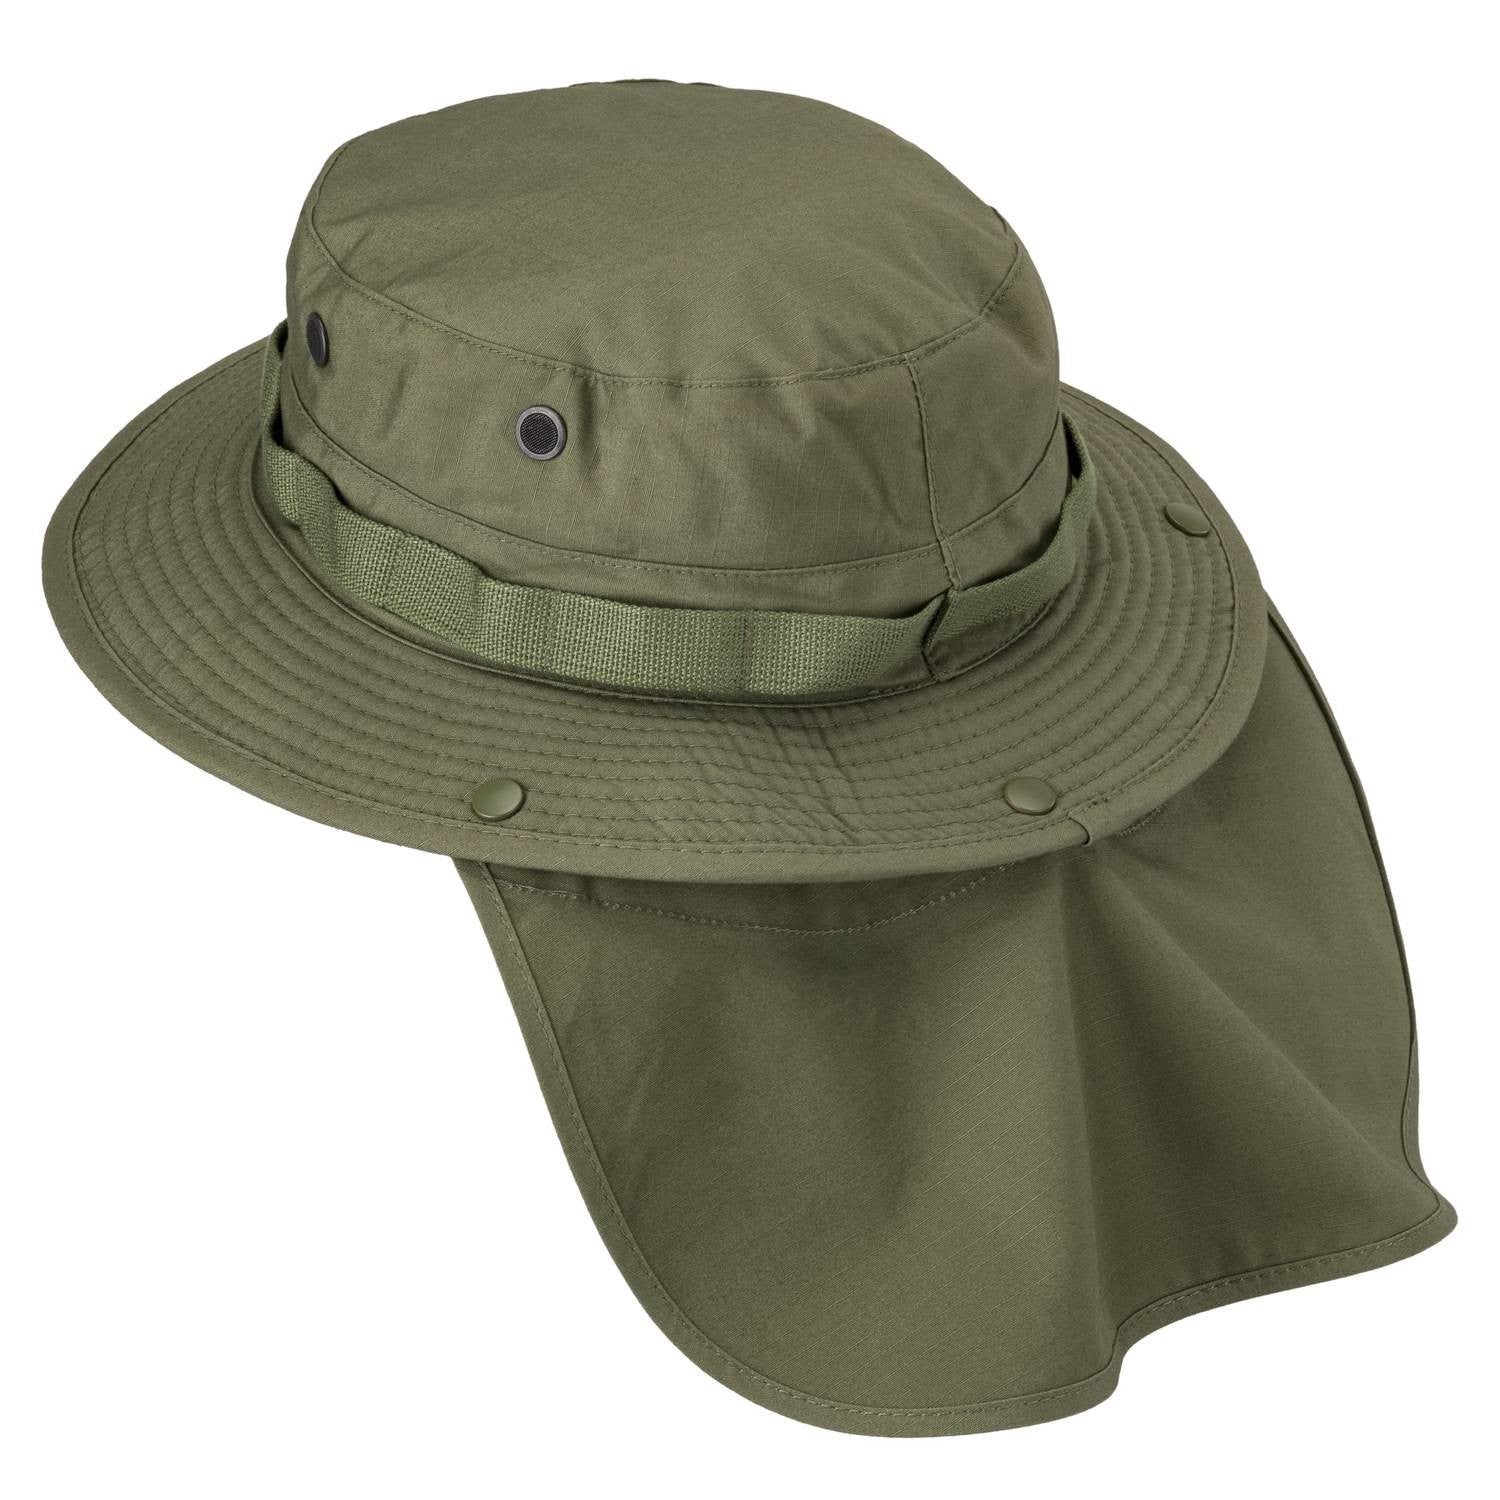 Helikon Tactical Boonie Hat: Style Meets Function – 3army store